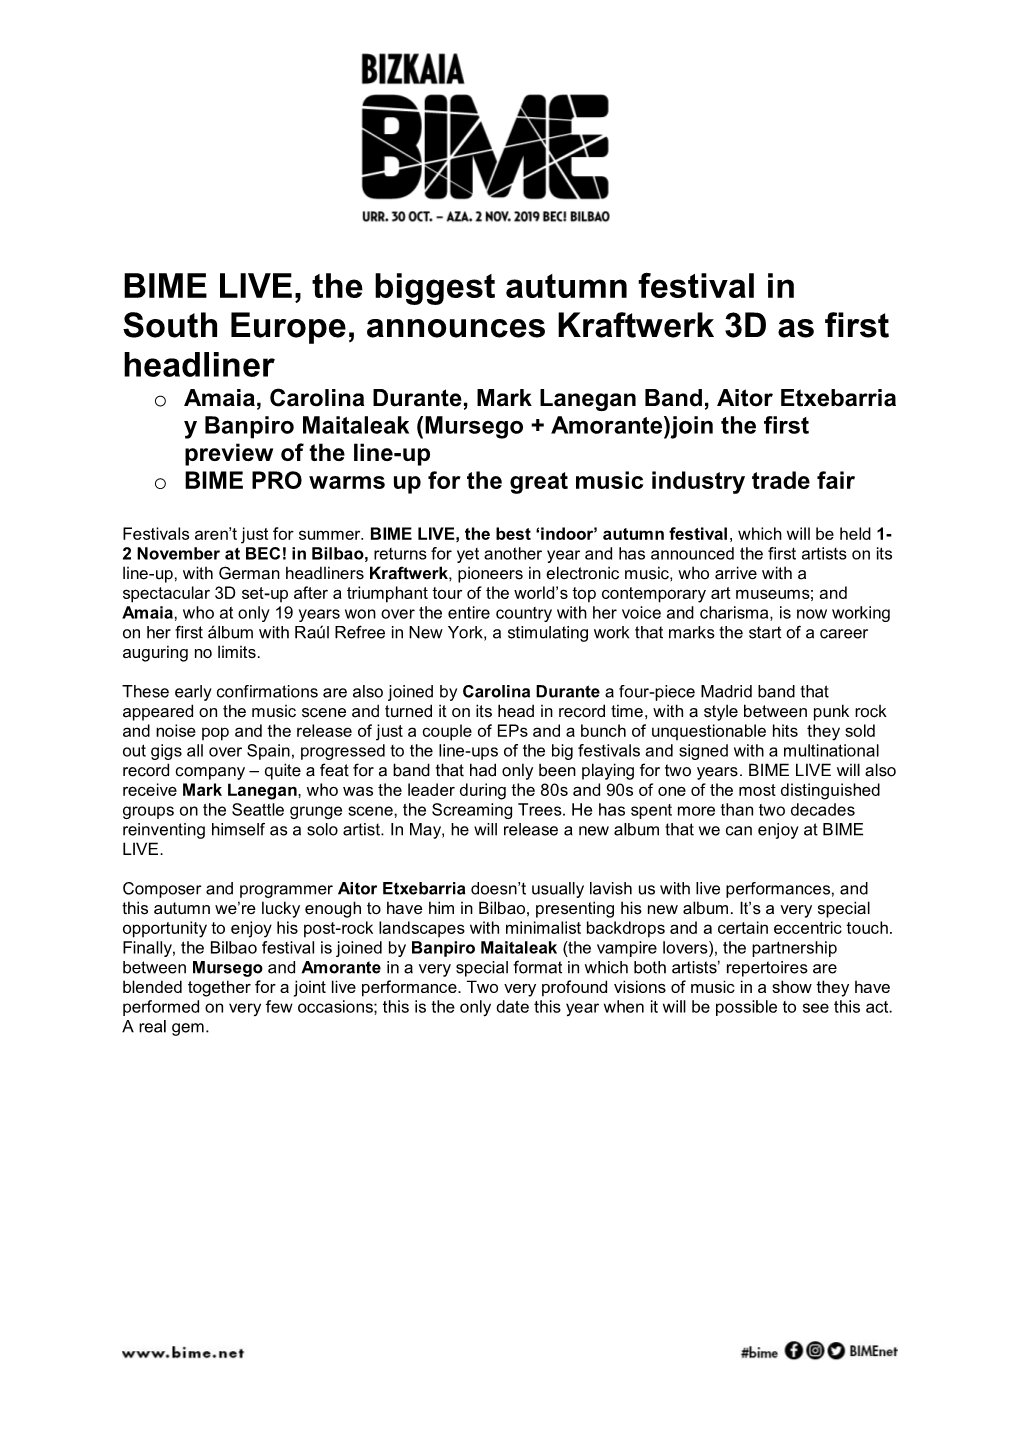 BIME LIVE, the Biggest Autumn Festival in South Europe, Announces